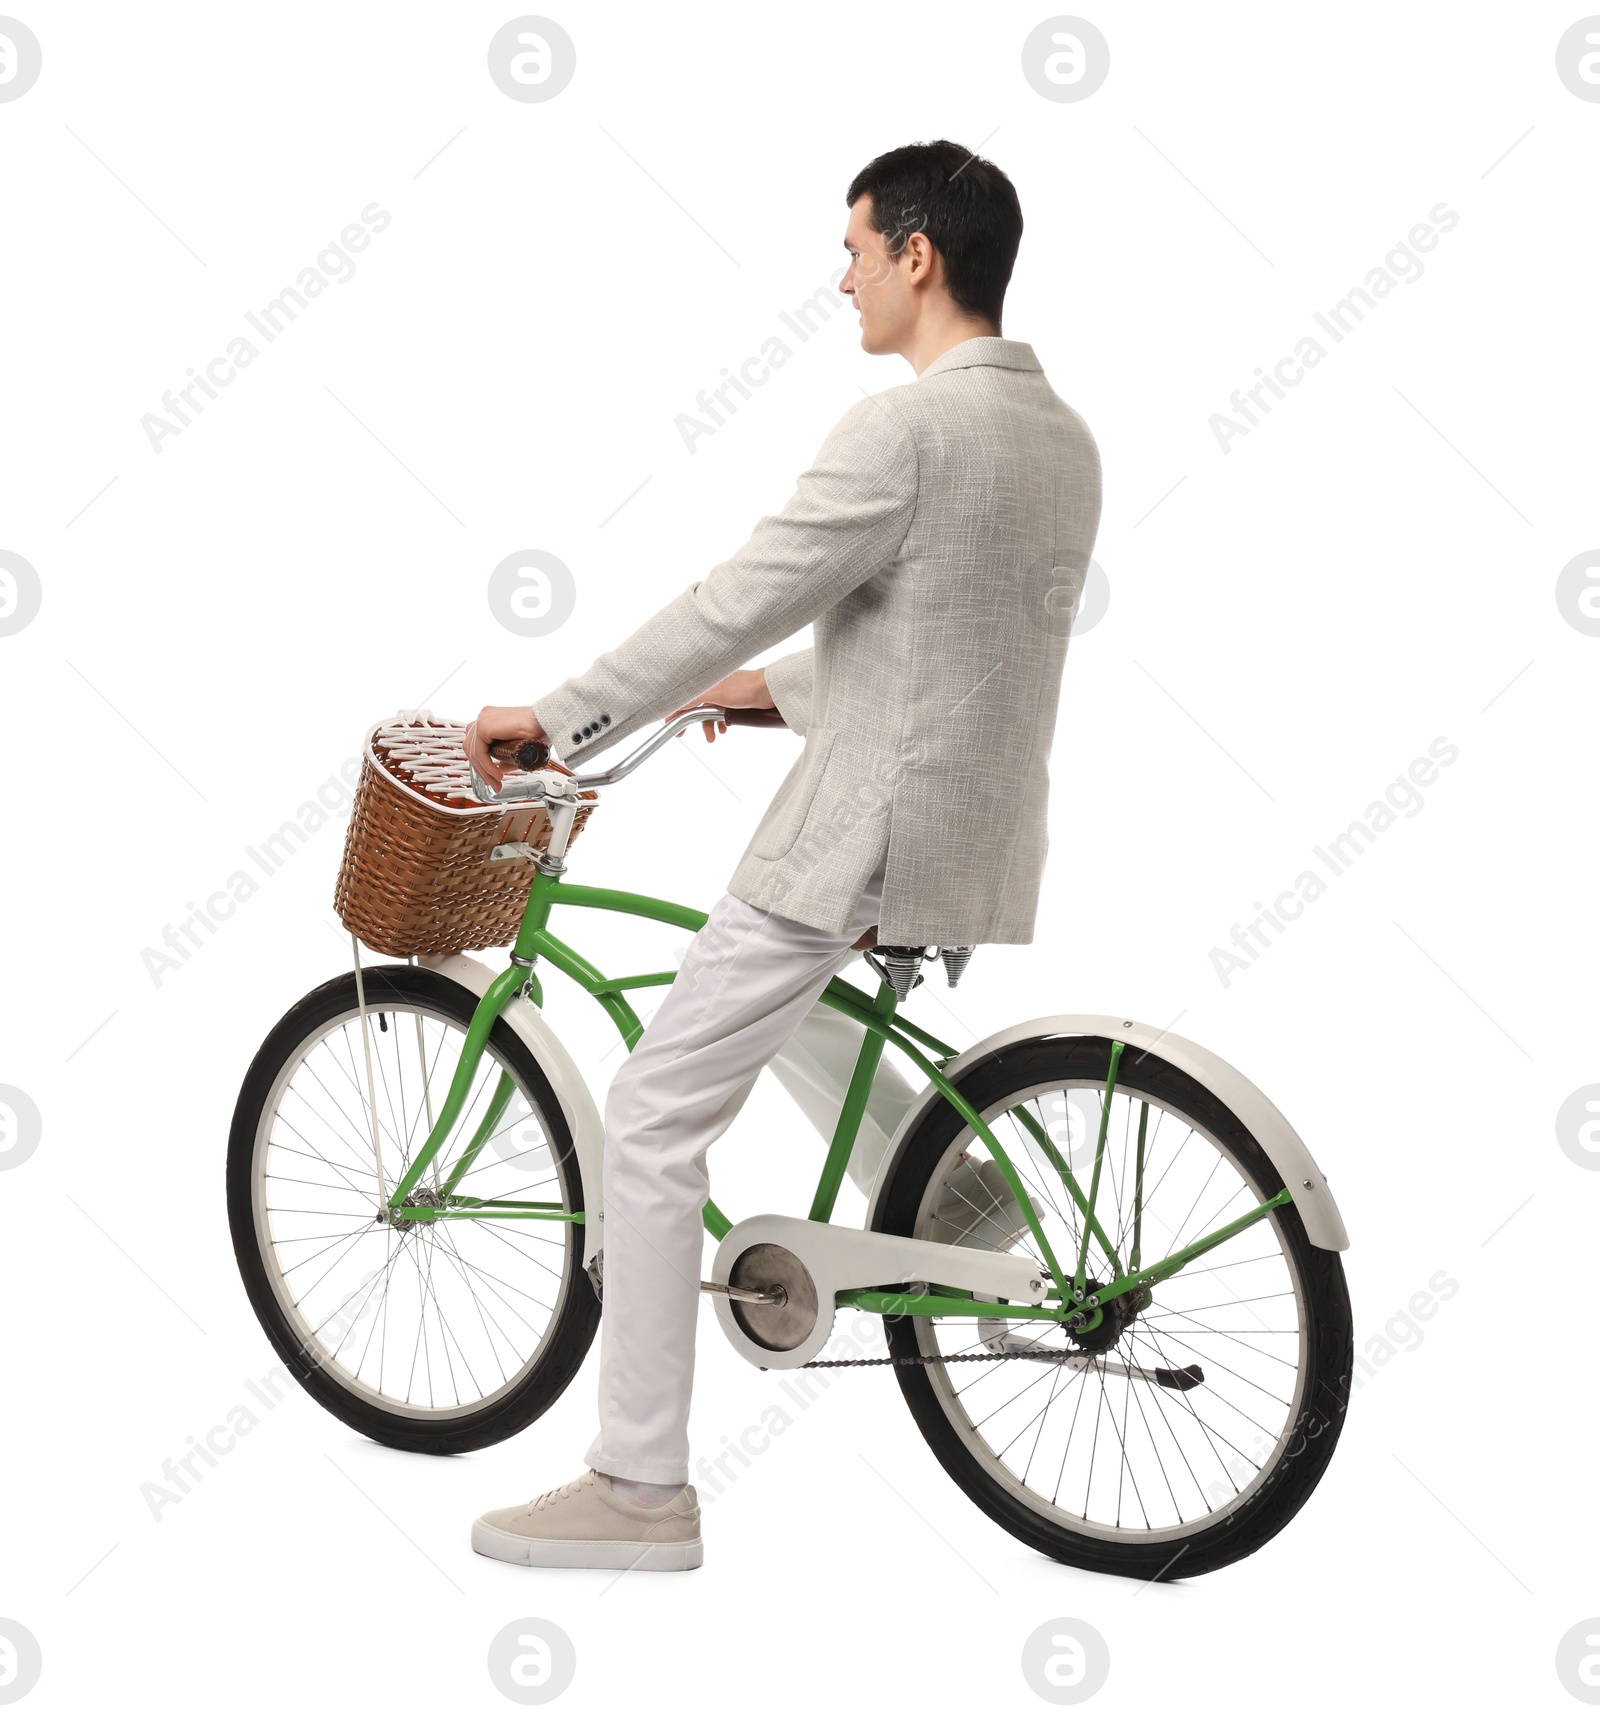 Photo of Man riding bicycle with basket isolated on white